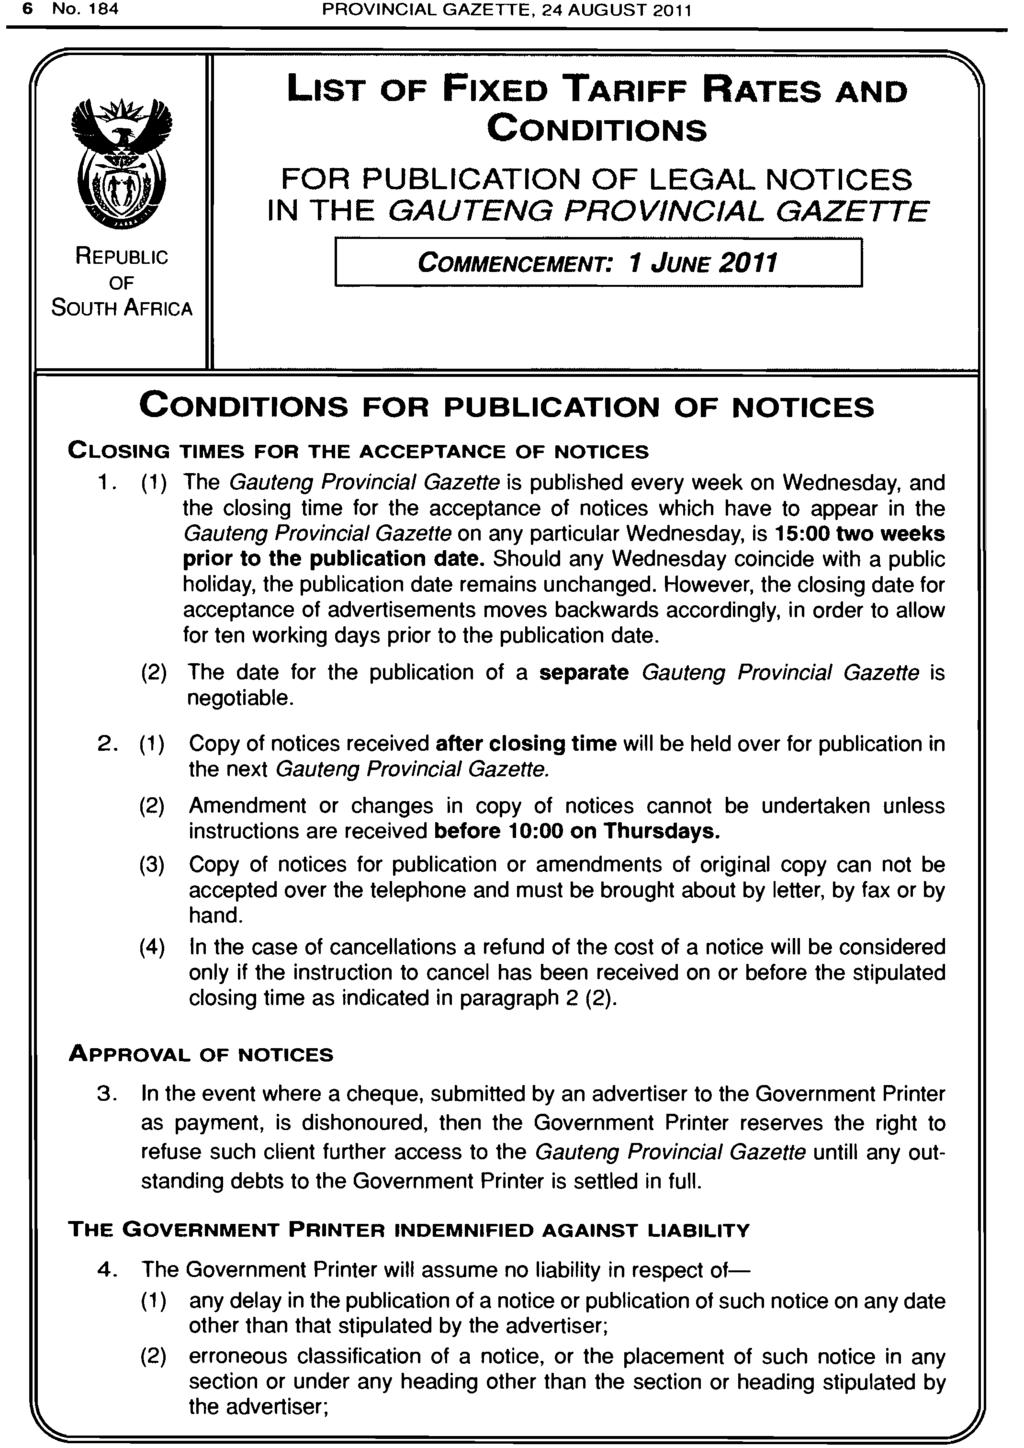 6 No. 184 PROVINCIAL GAZETTE, 24 AUGUST 2011 11 REPUBLIC OF SOUTH AFRICA LIST OF FIXED TARIFF RATES AND CONDITIONS FOR PUBLICATION OF LEGAL NOTICES IN THE GAUTENG PROVINCIAL GAZETTE I COMMENCEMENT: 1